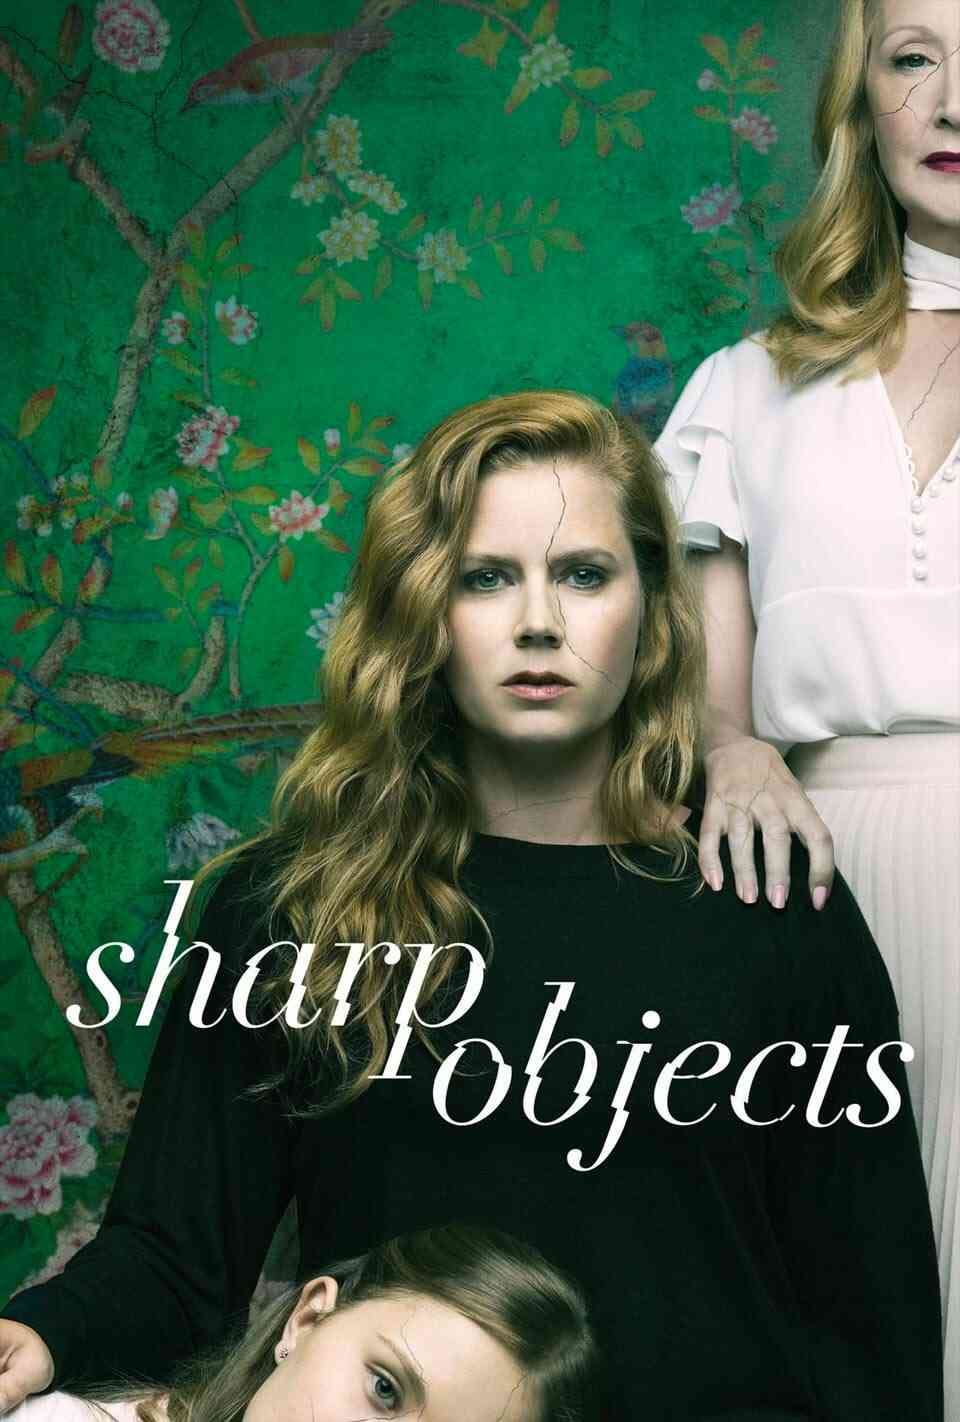 Read Sharp Objects screenplay (poster)